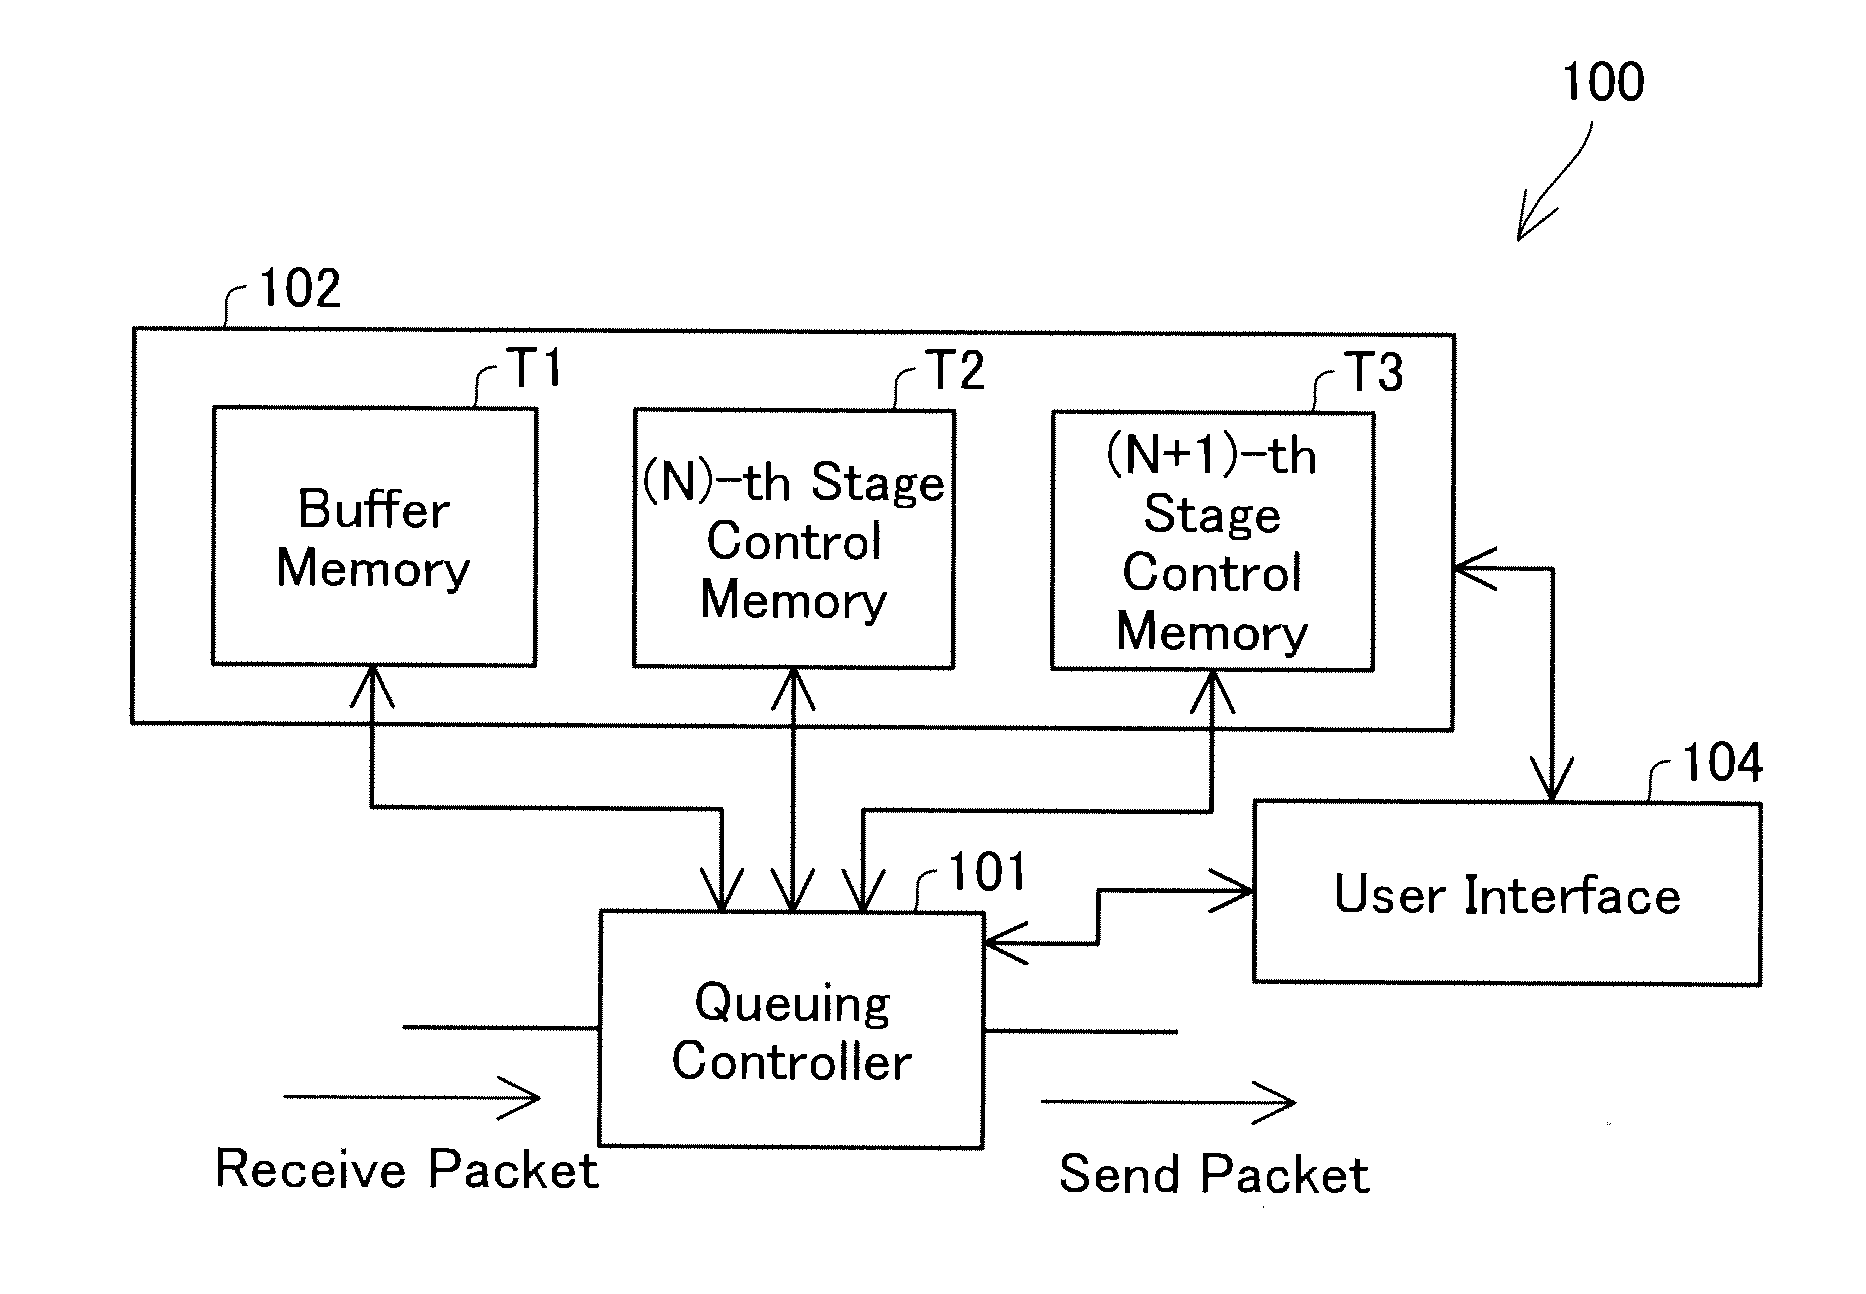 Packet relay apparatus and method of relaying packet